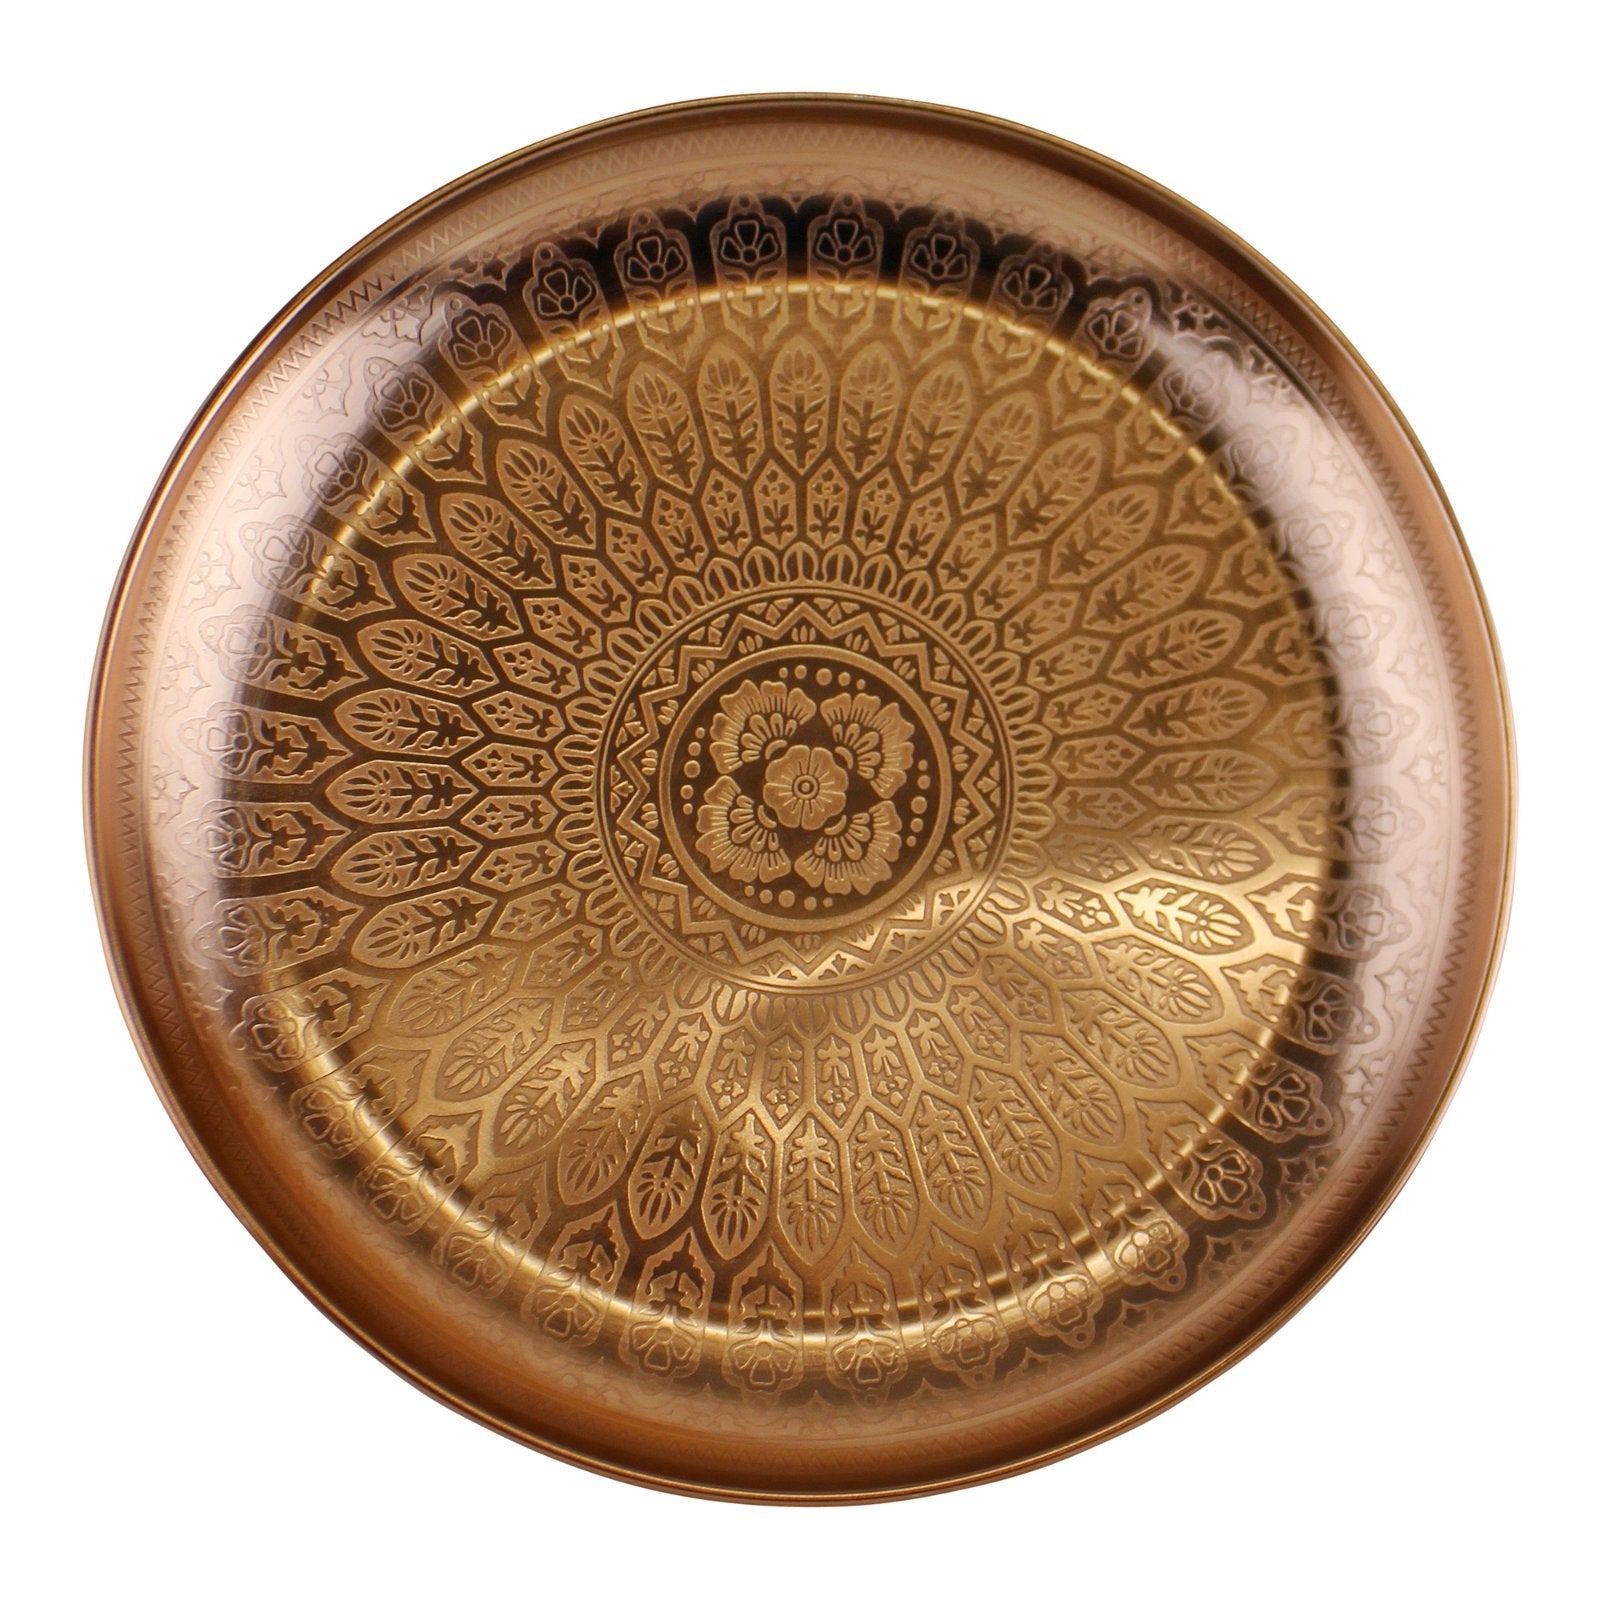 Decorative Copper Metal Tray With Etched Design  from Eleanoras